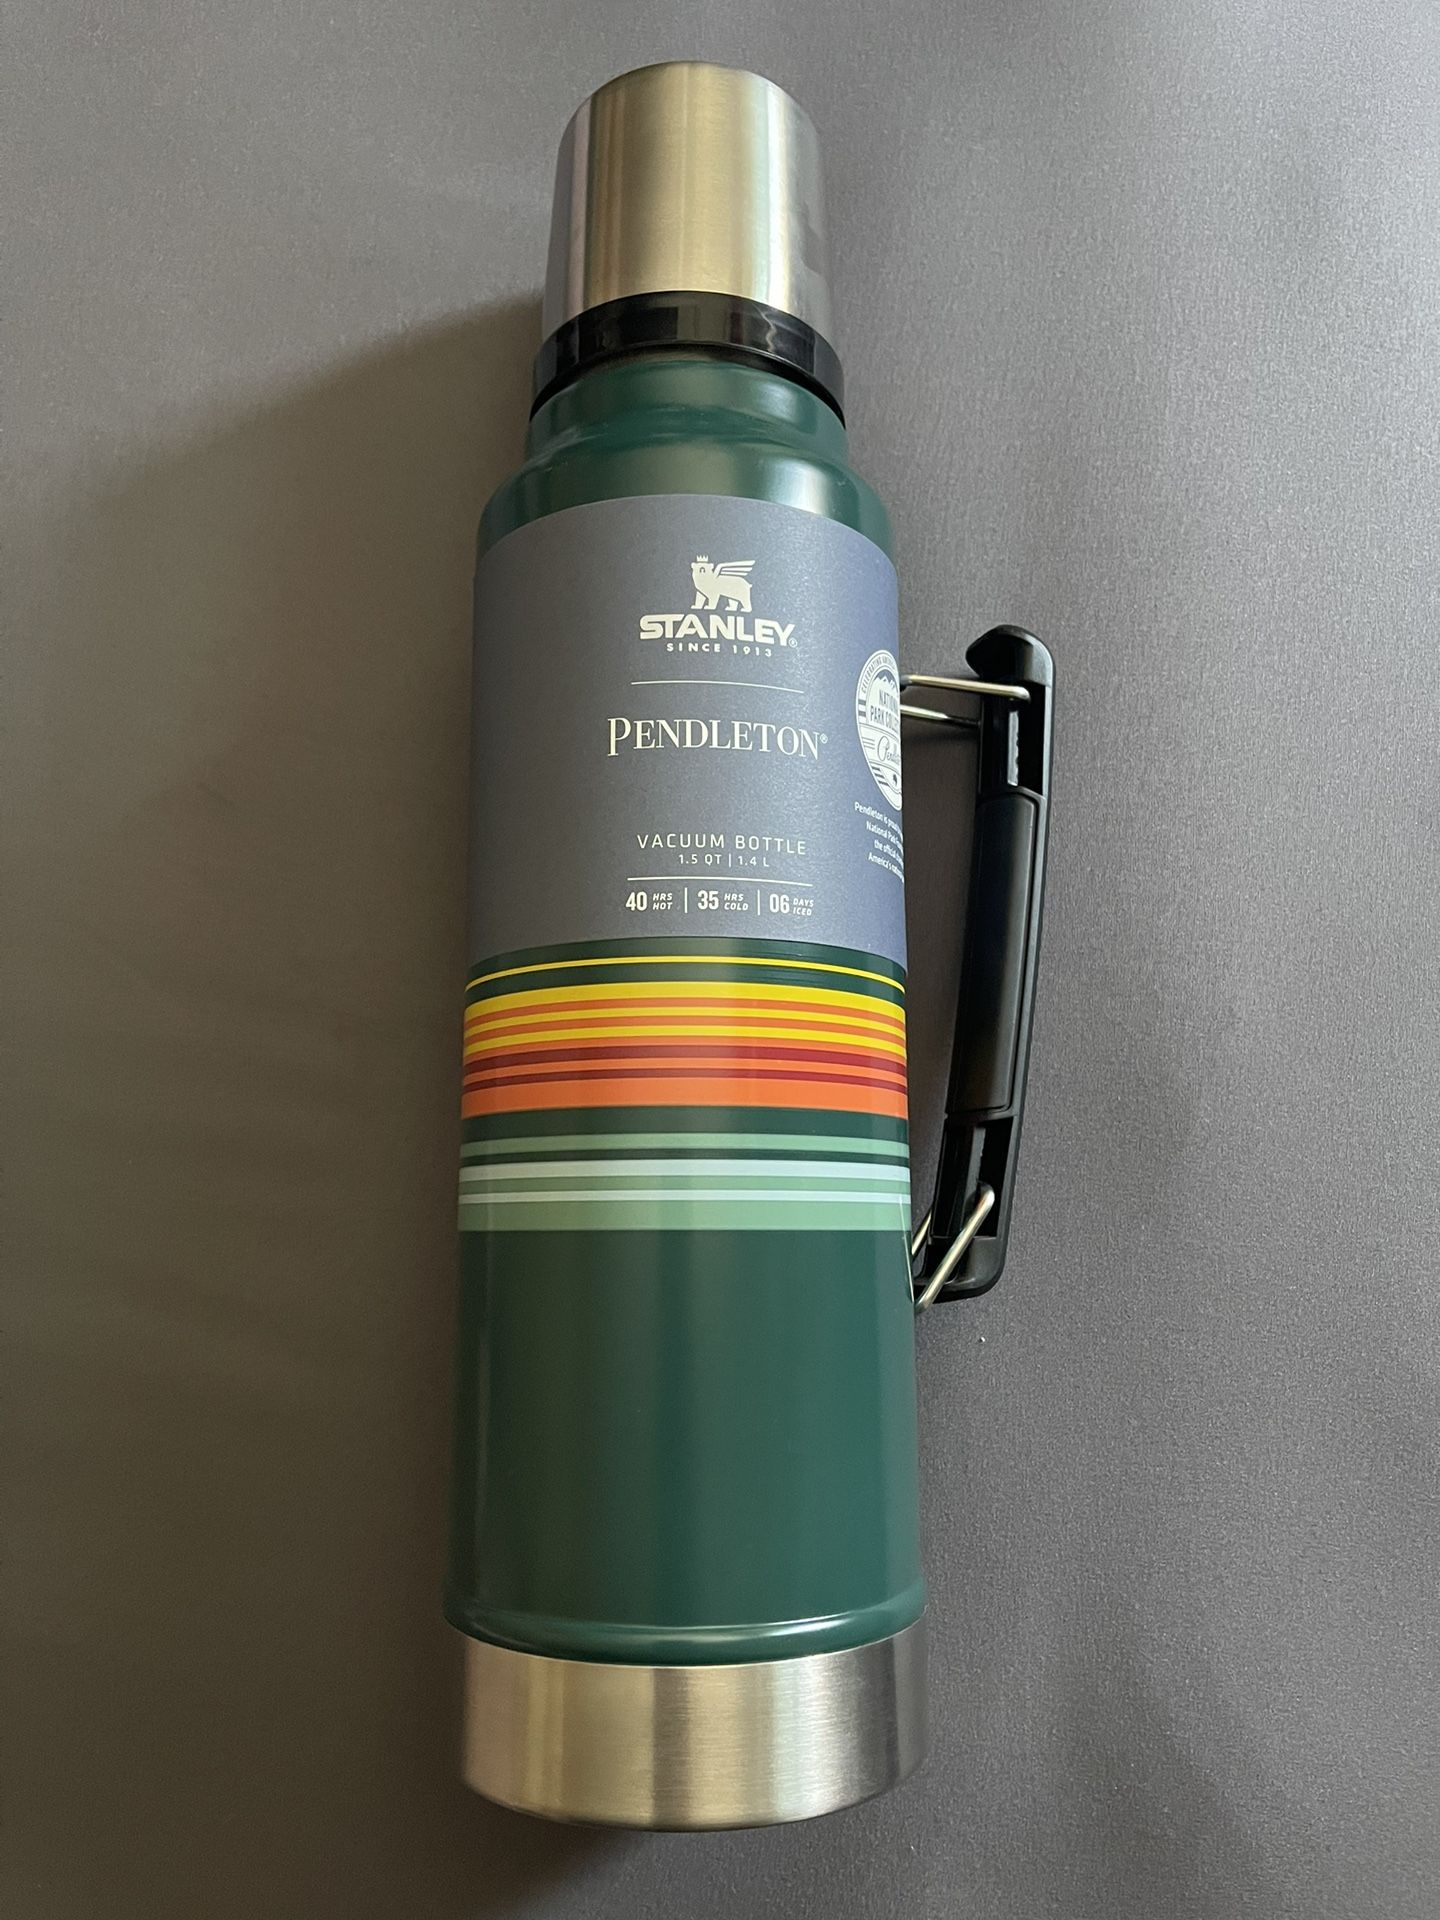 Stanley Pendleton Thermos for Sale in Seattle, WA - OfferUp